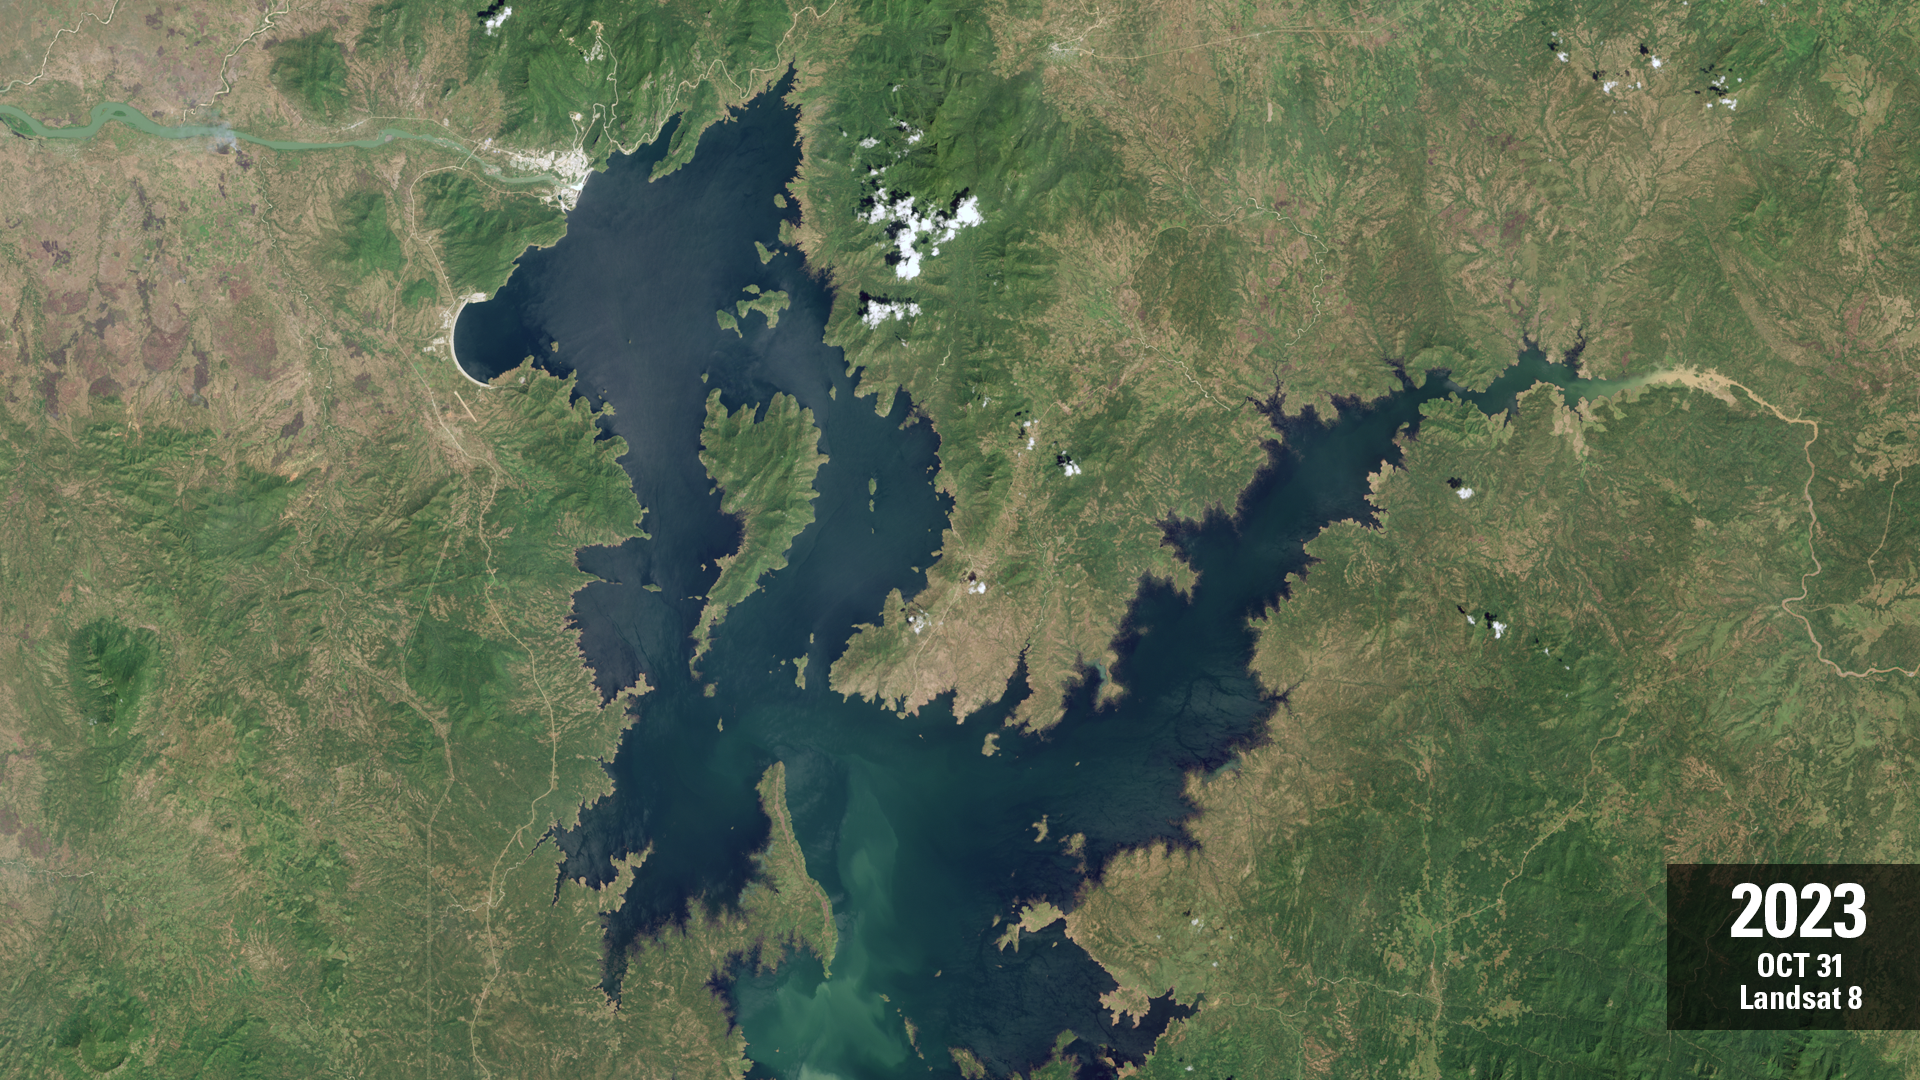 Landsat Views of Africa's Largest Hydro Dam after